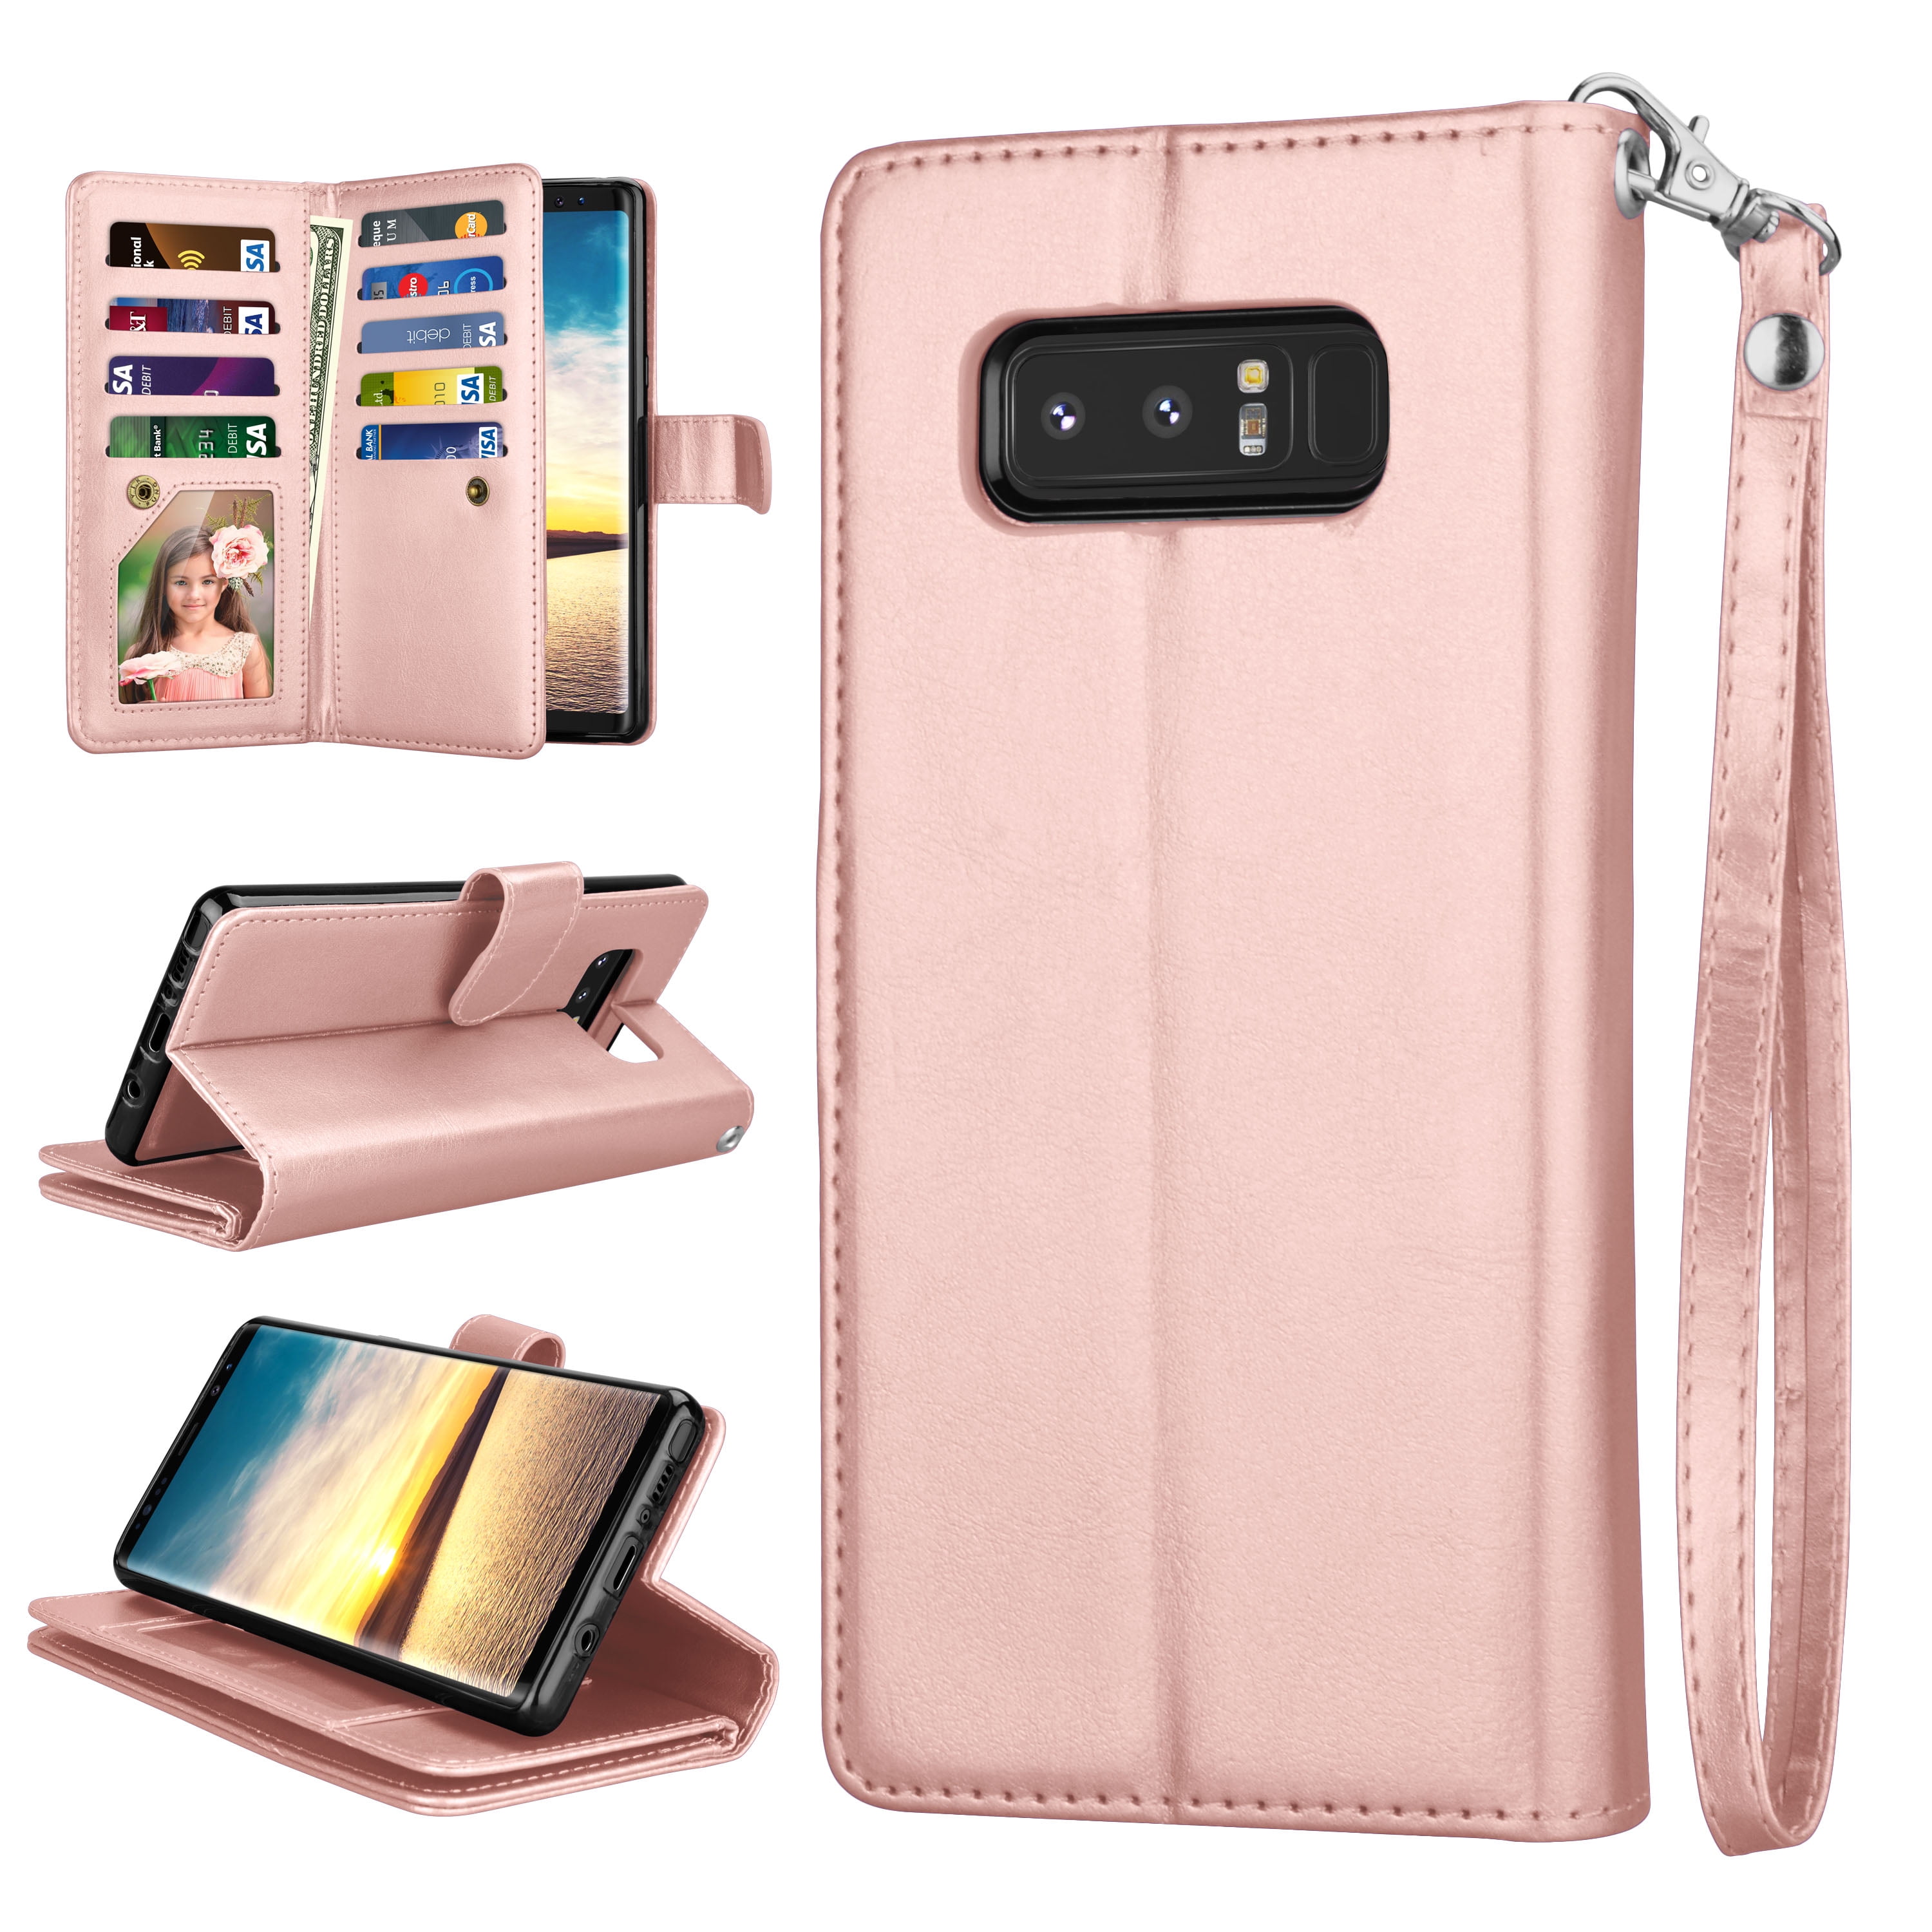 Samsung Galaxy Note8 Flip Case Cover for Samsung Galaxy Note8 Leather Card Holders Mobile Phone case Extra-Shockproof Business Kickstand with Free Waterproof-Bag 